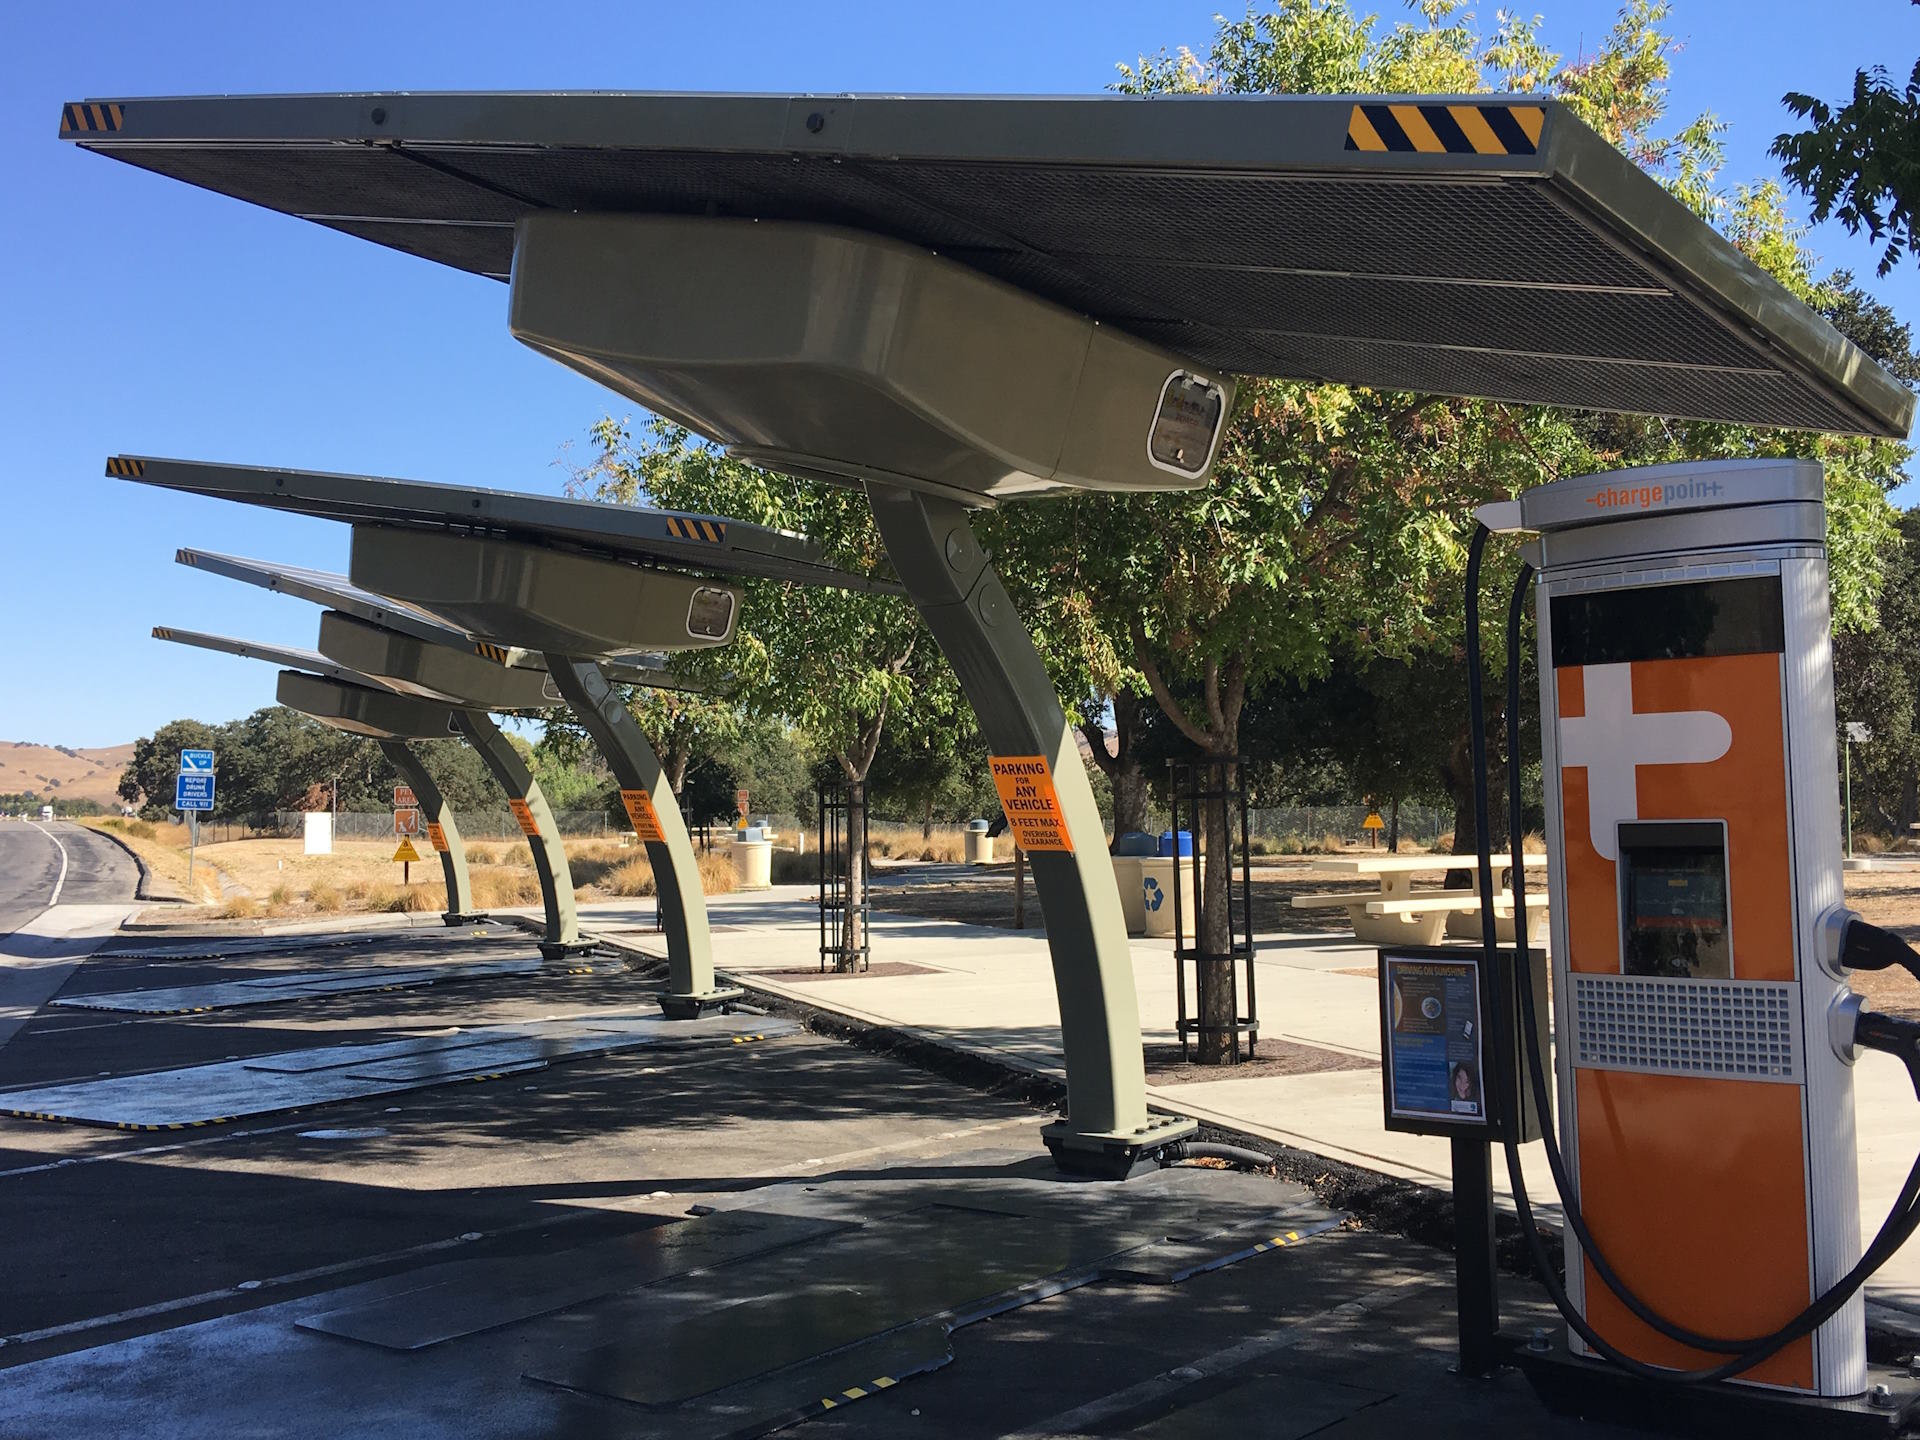 Solar power and electric cars: solar-powered charging stations as the most promising synergy